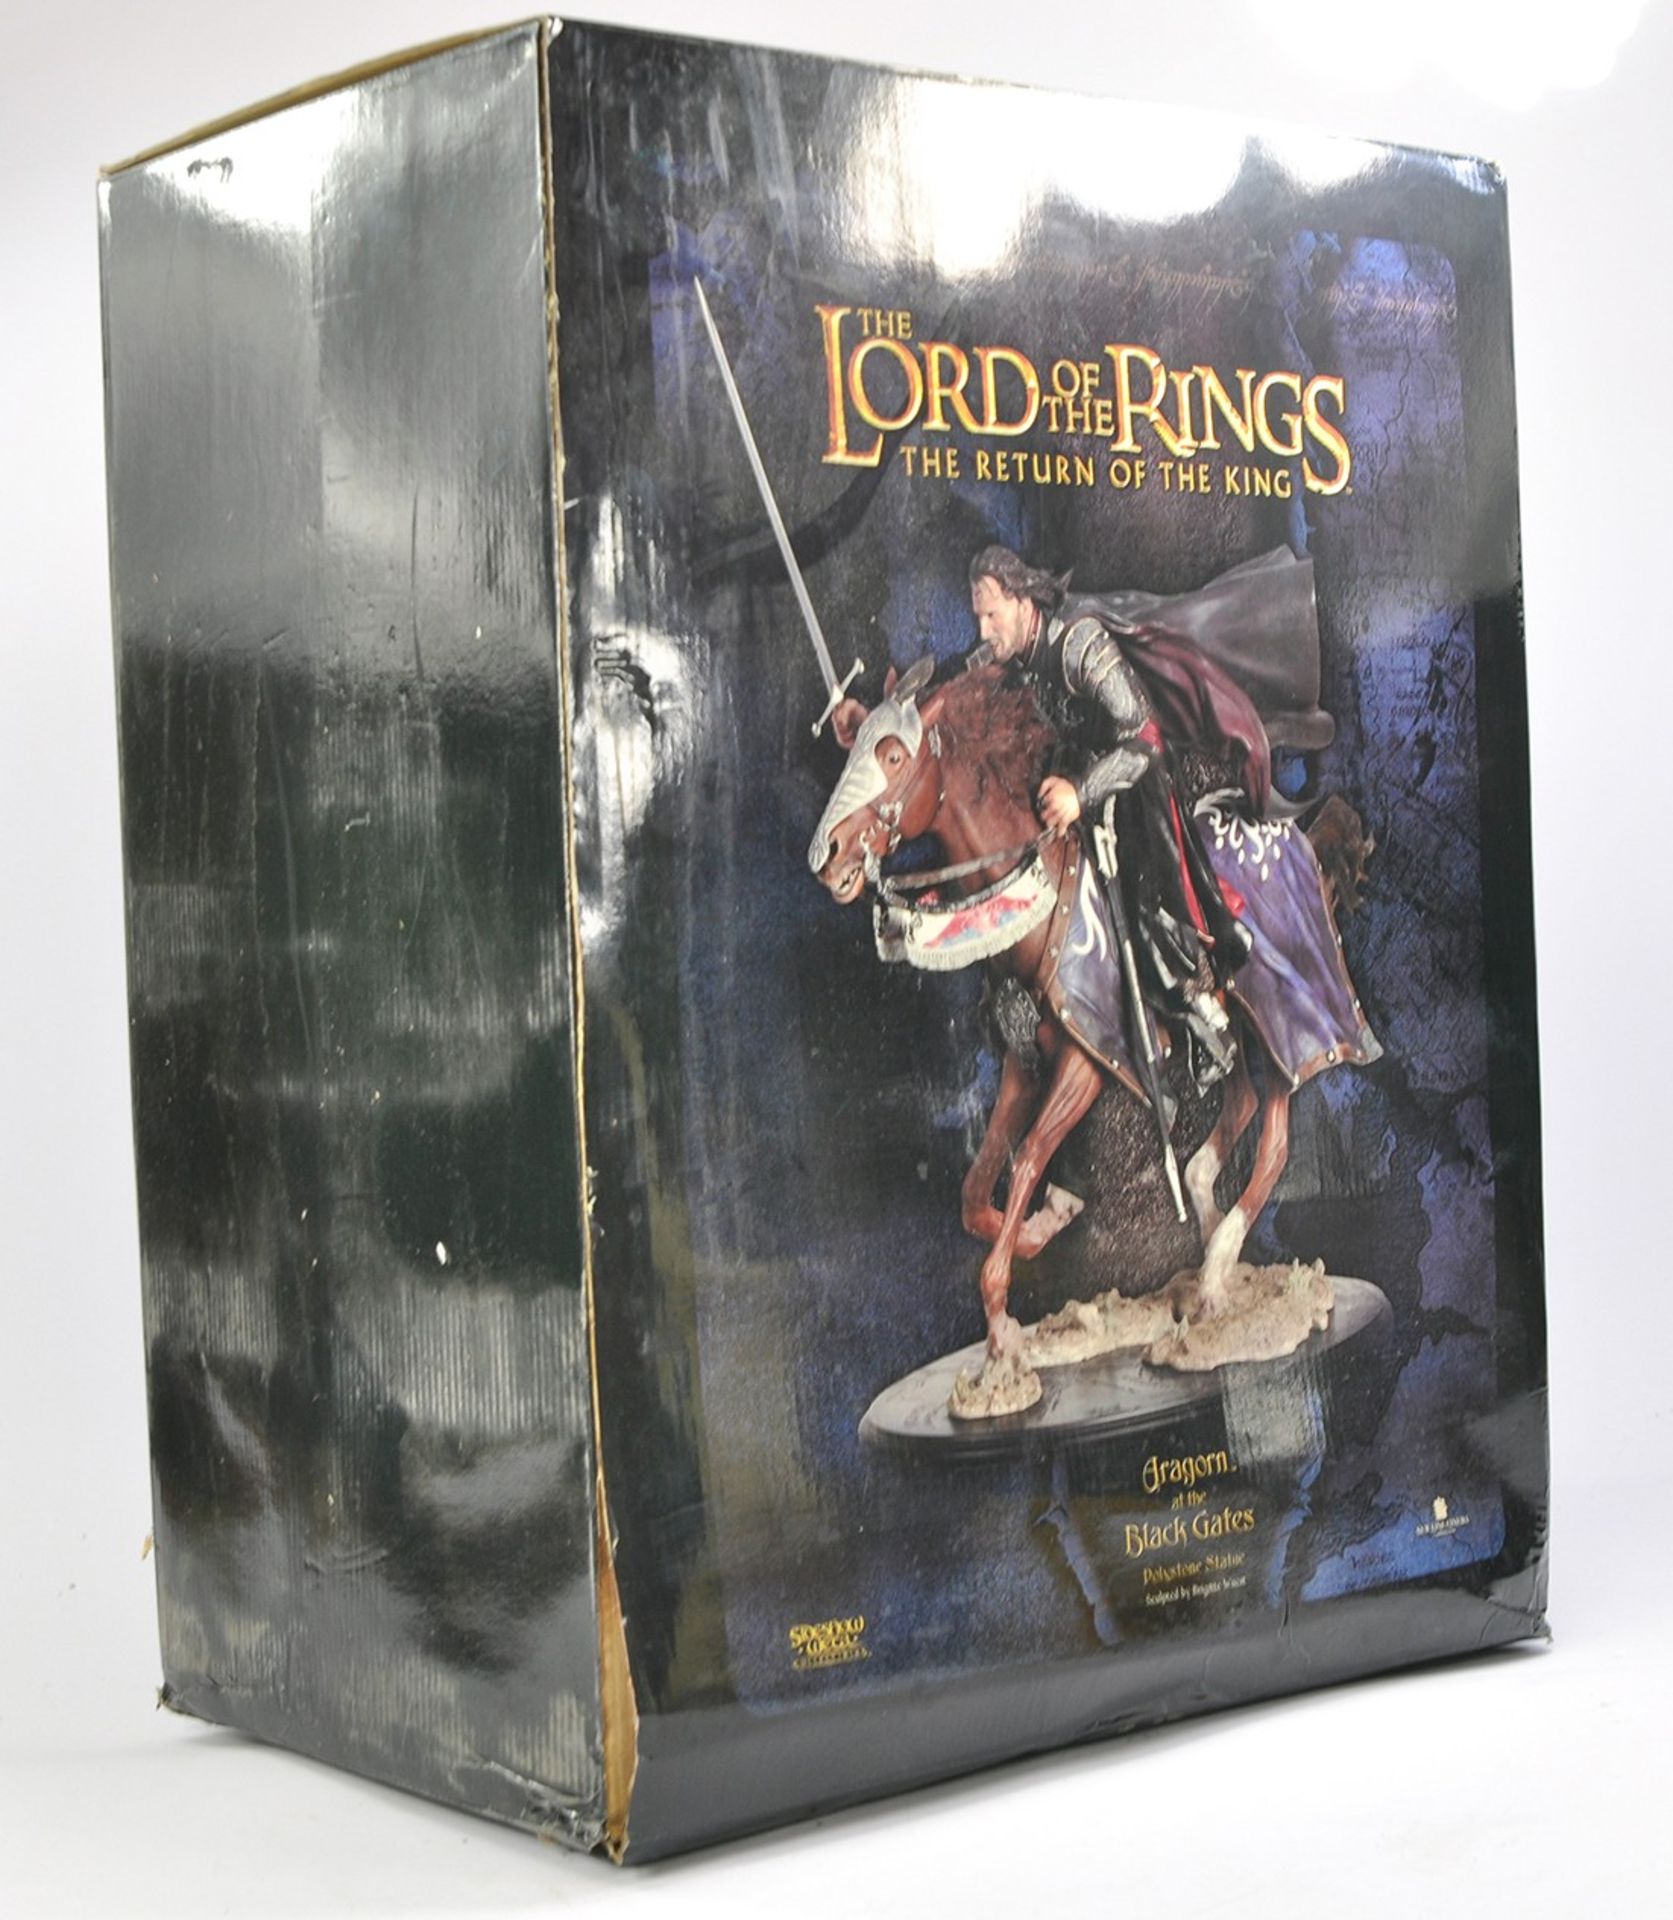 WETA / Sideshow Large Lord of the Rings Aragon at the Black Gates Limited Edition Statue. Without